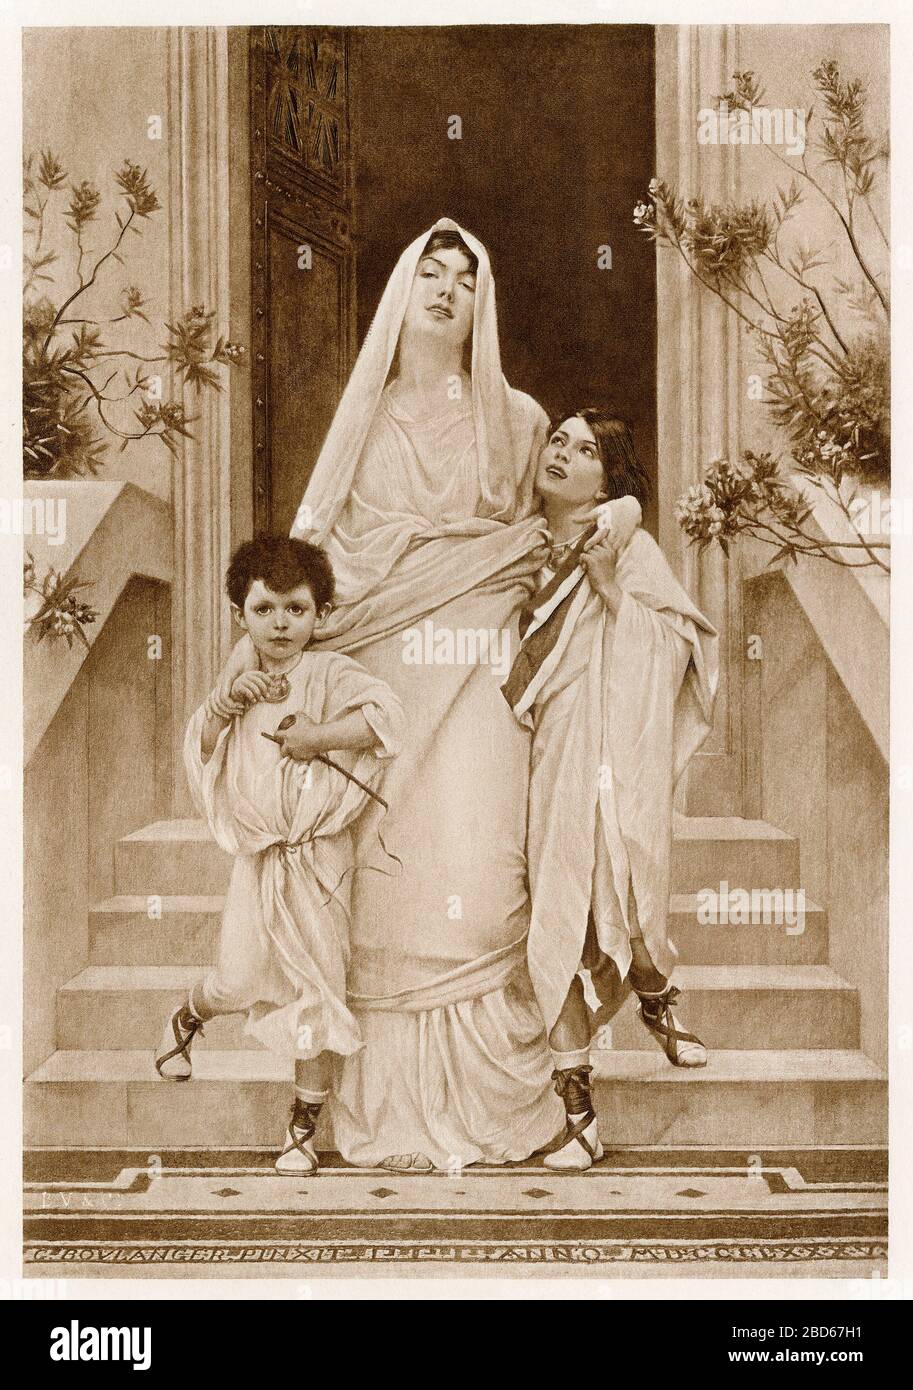 Cornelia with her sons, Tiberius and Gaius Gracchi, ancient Rome. Photogravure of an illustration Stock Photo